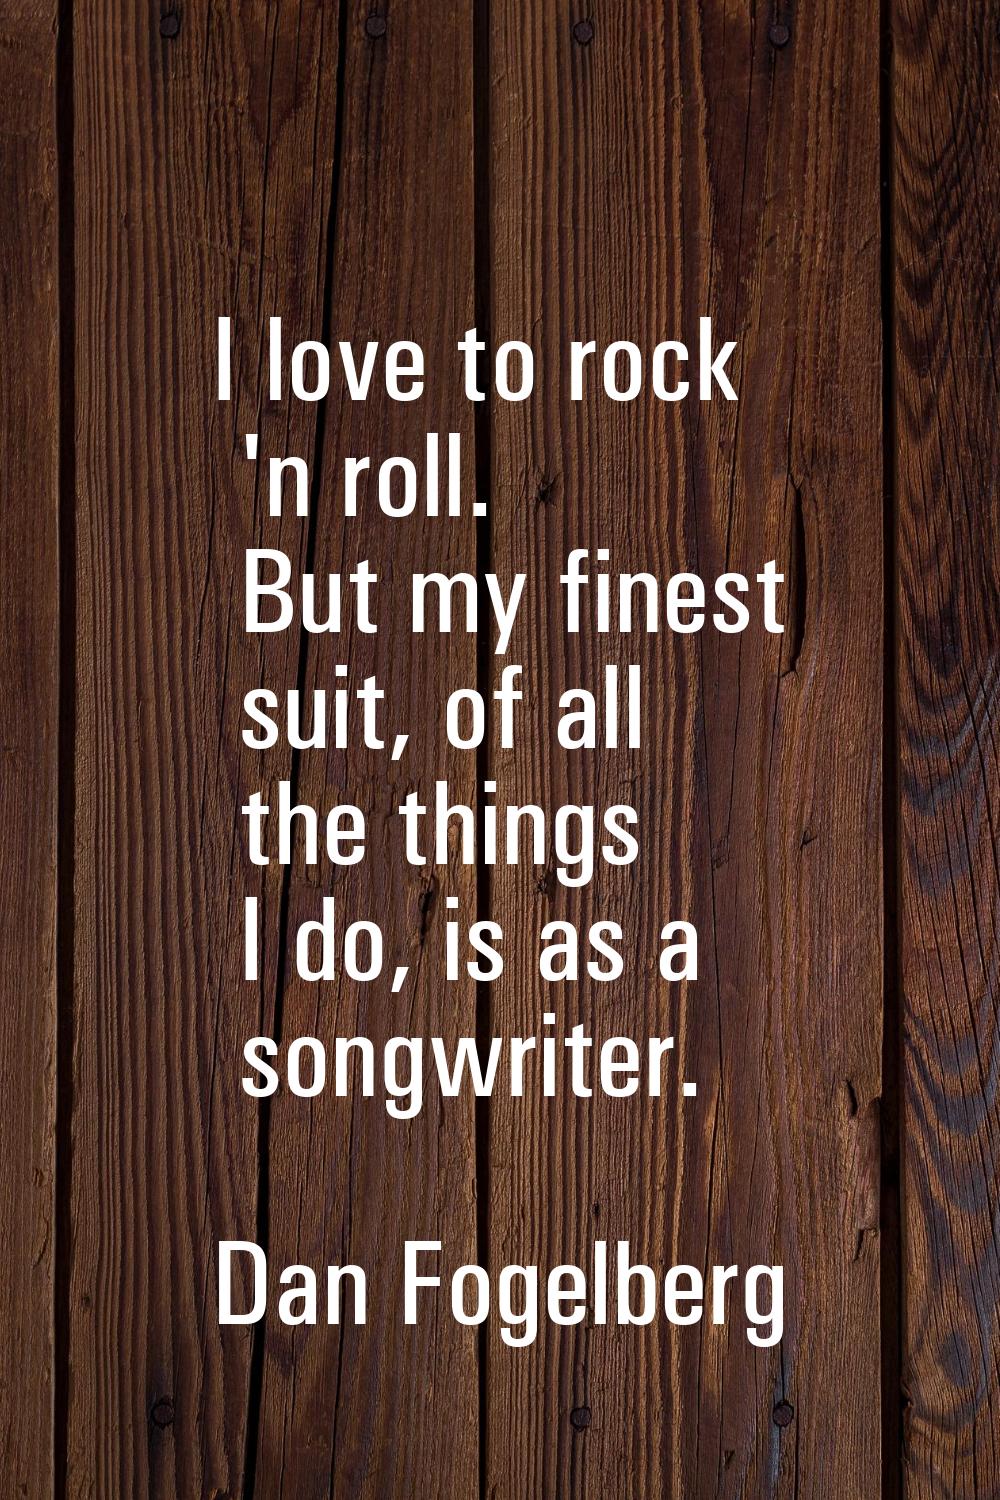 I love to rock 'n roll. But my finest suit, of all the things I do, is as a songwriter.